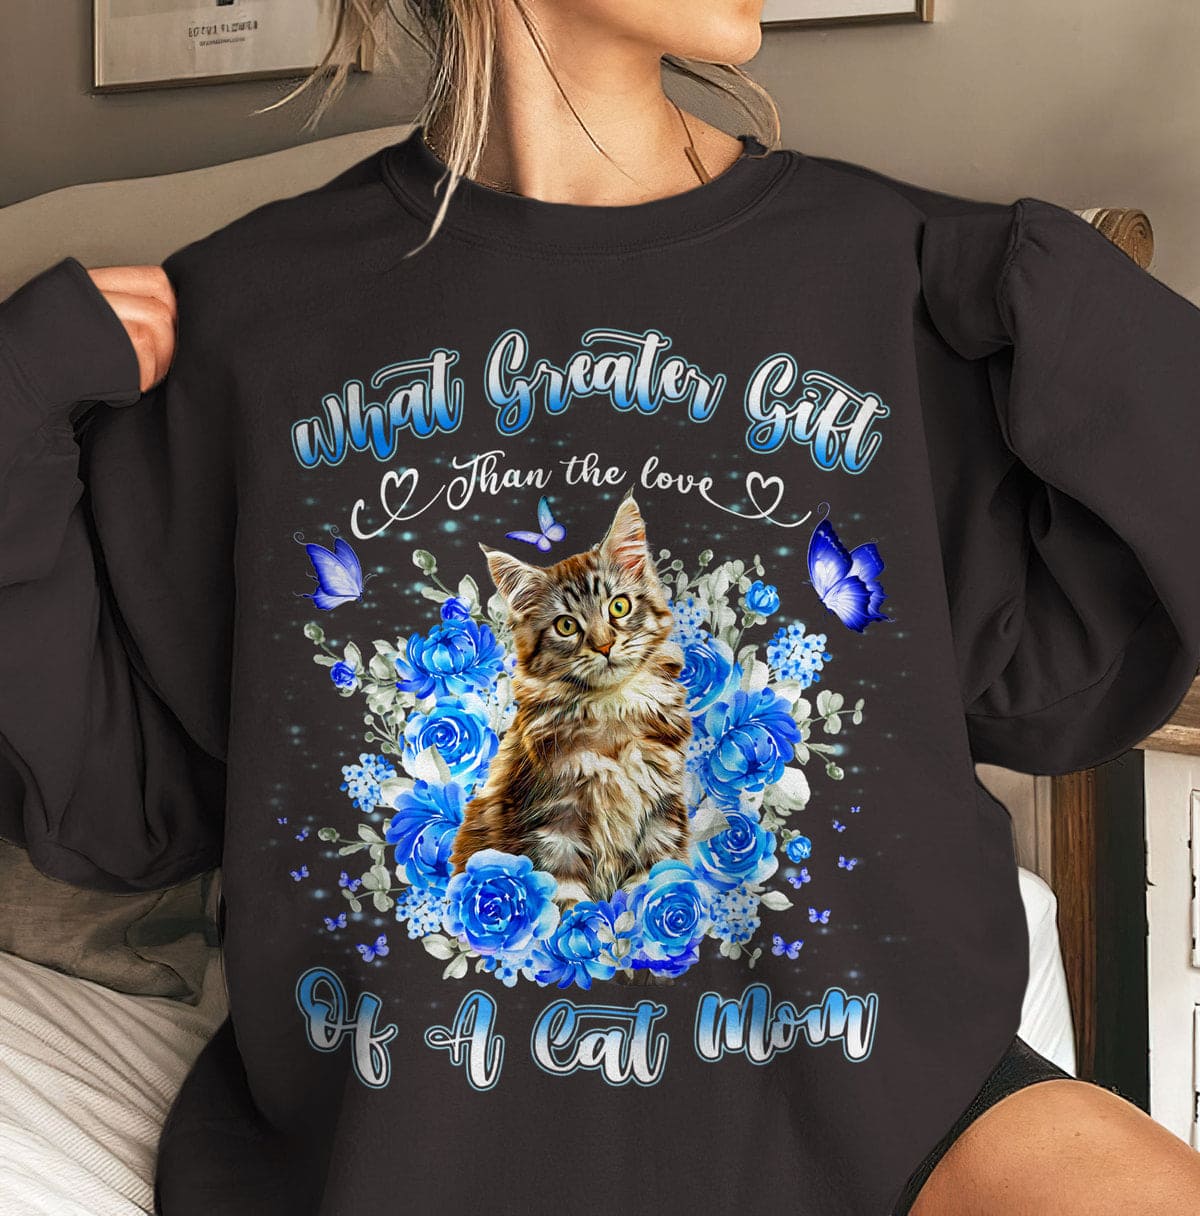 What grater gift than the love of a cat mom - T-shirt for cat mom, Norwegian forest cat